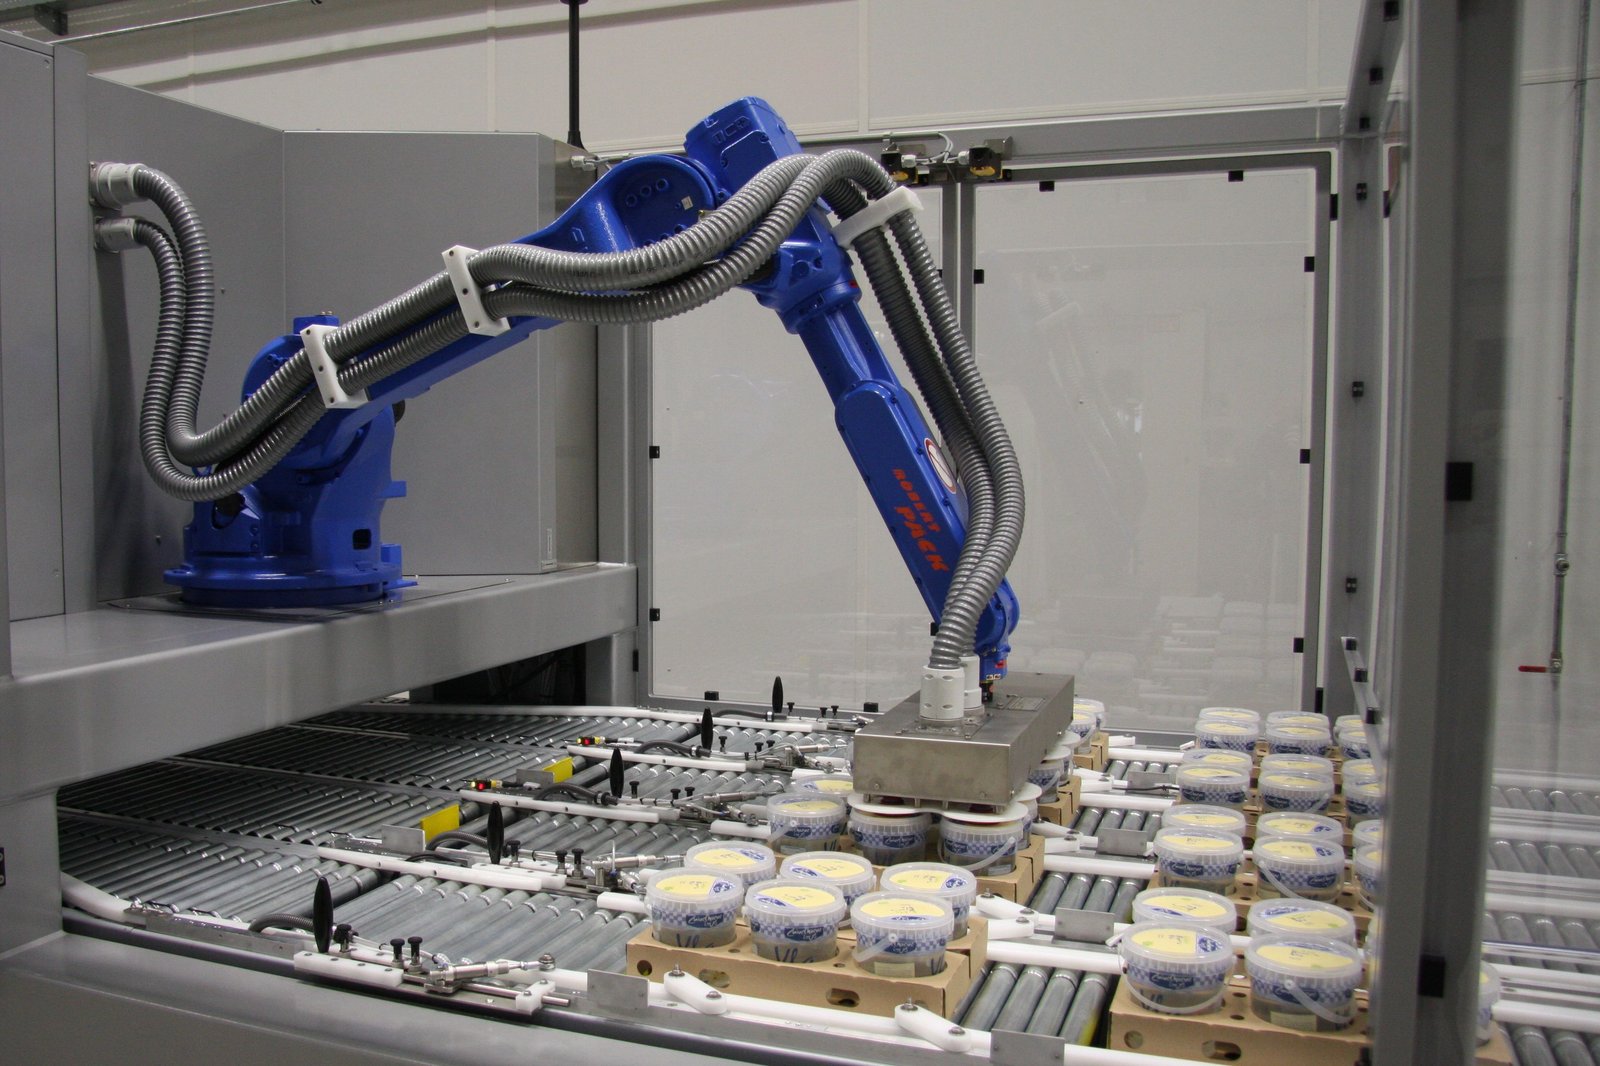 Robertpack-mix-robot-for-case-packing-buckets-with-yoghurt-Zuivelhoeve